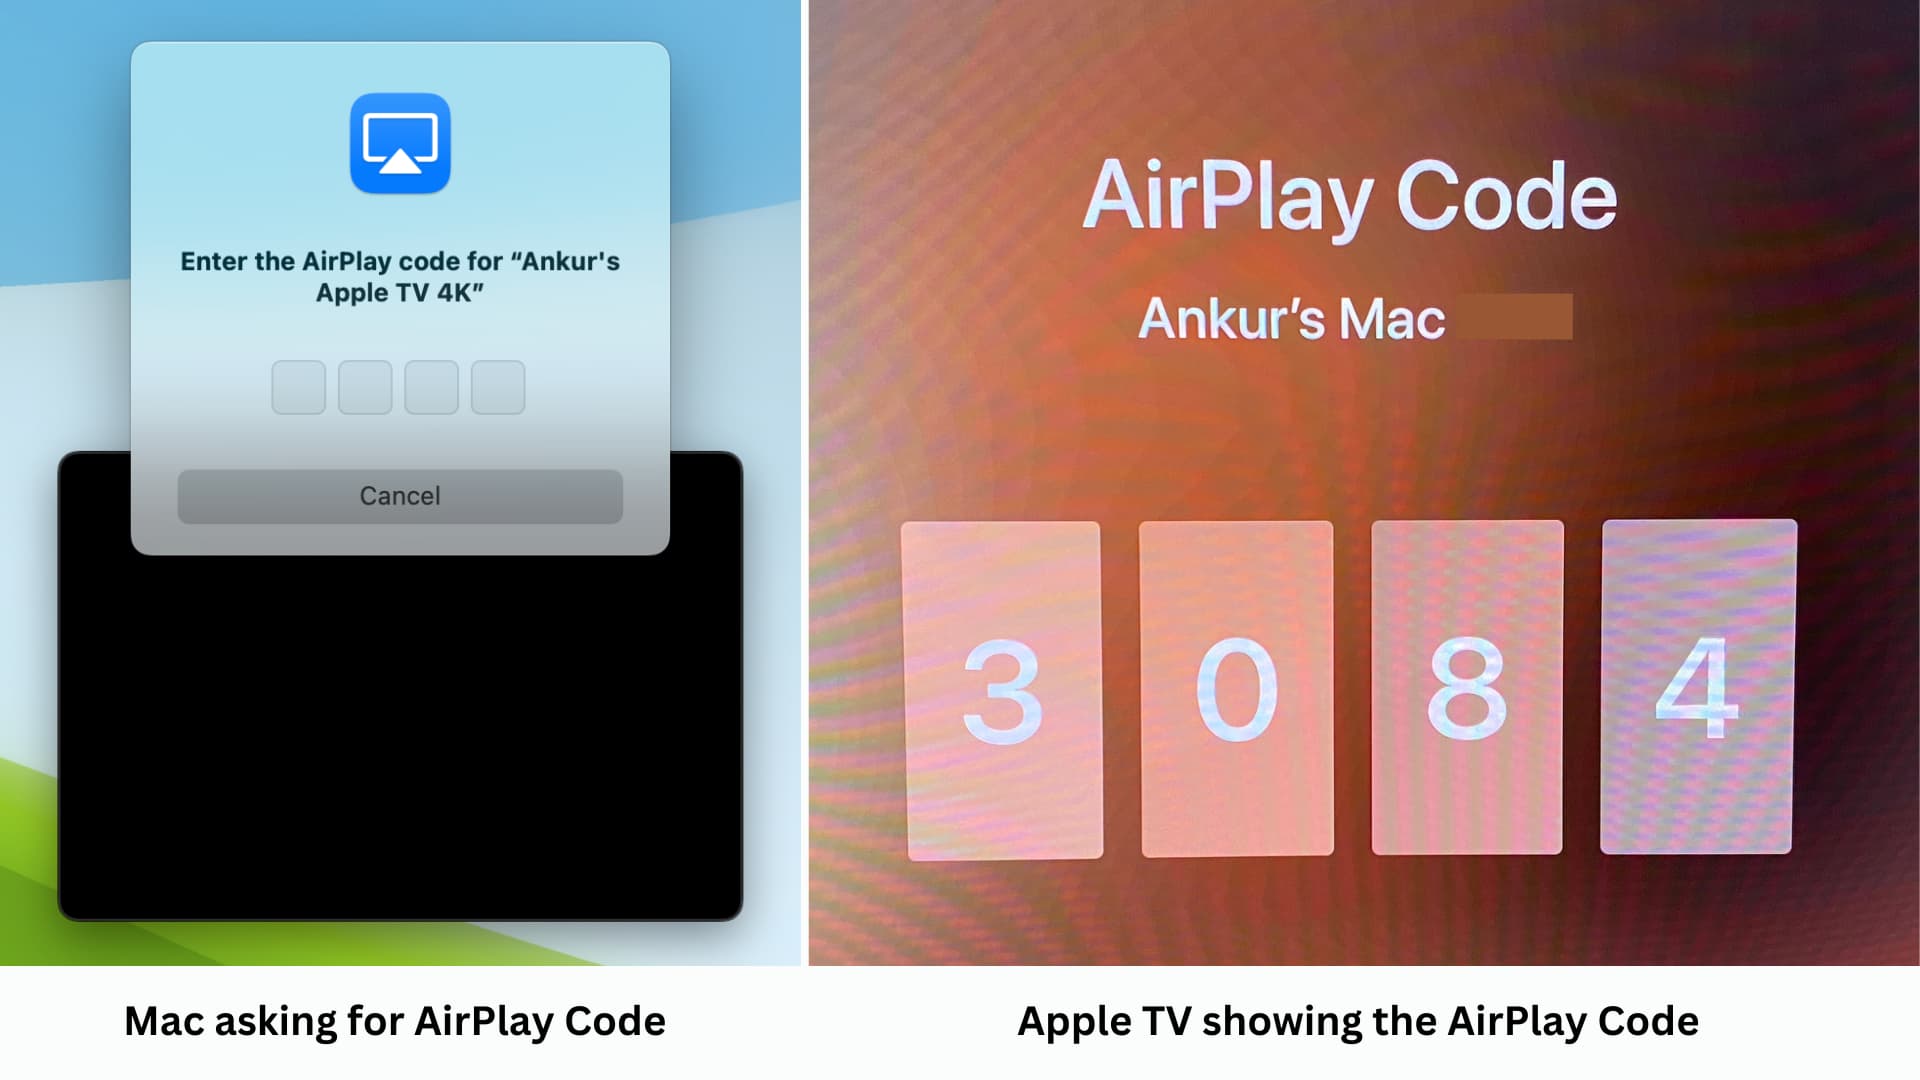 Mac asking for AirPlay Code and Apple TV showing that four-digit code that has to be entered on Mac for confirmation